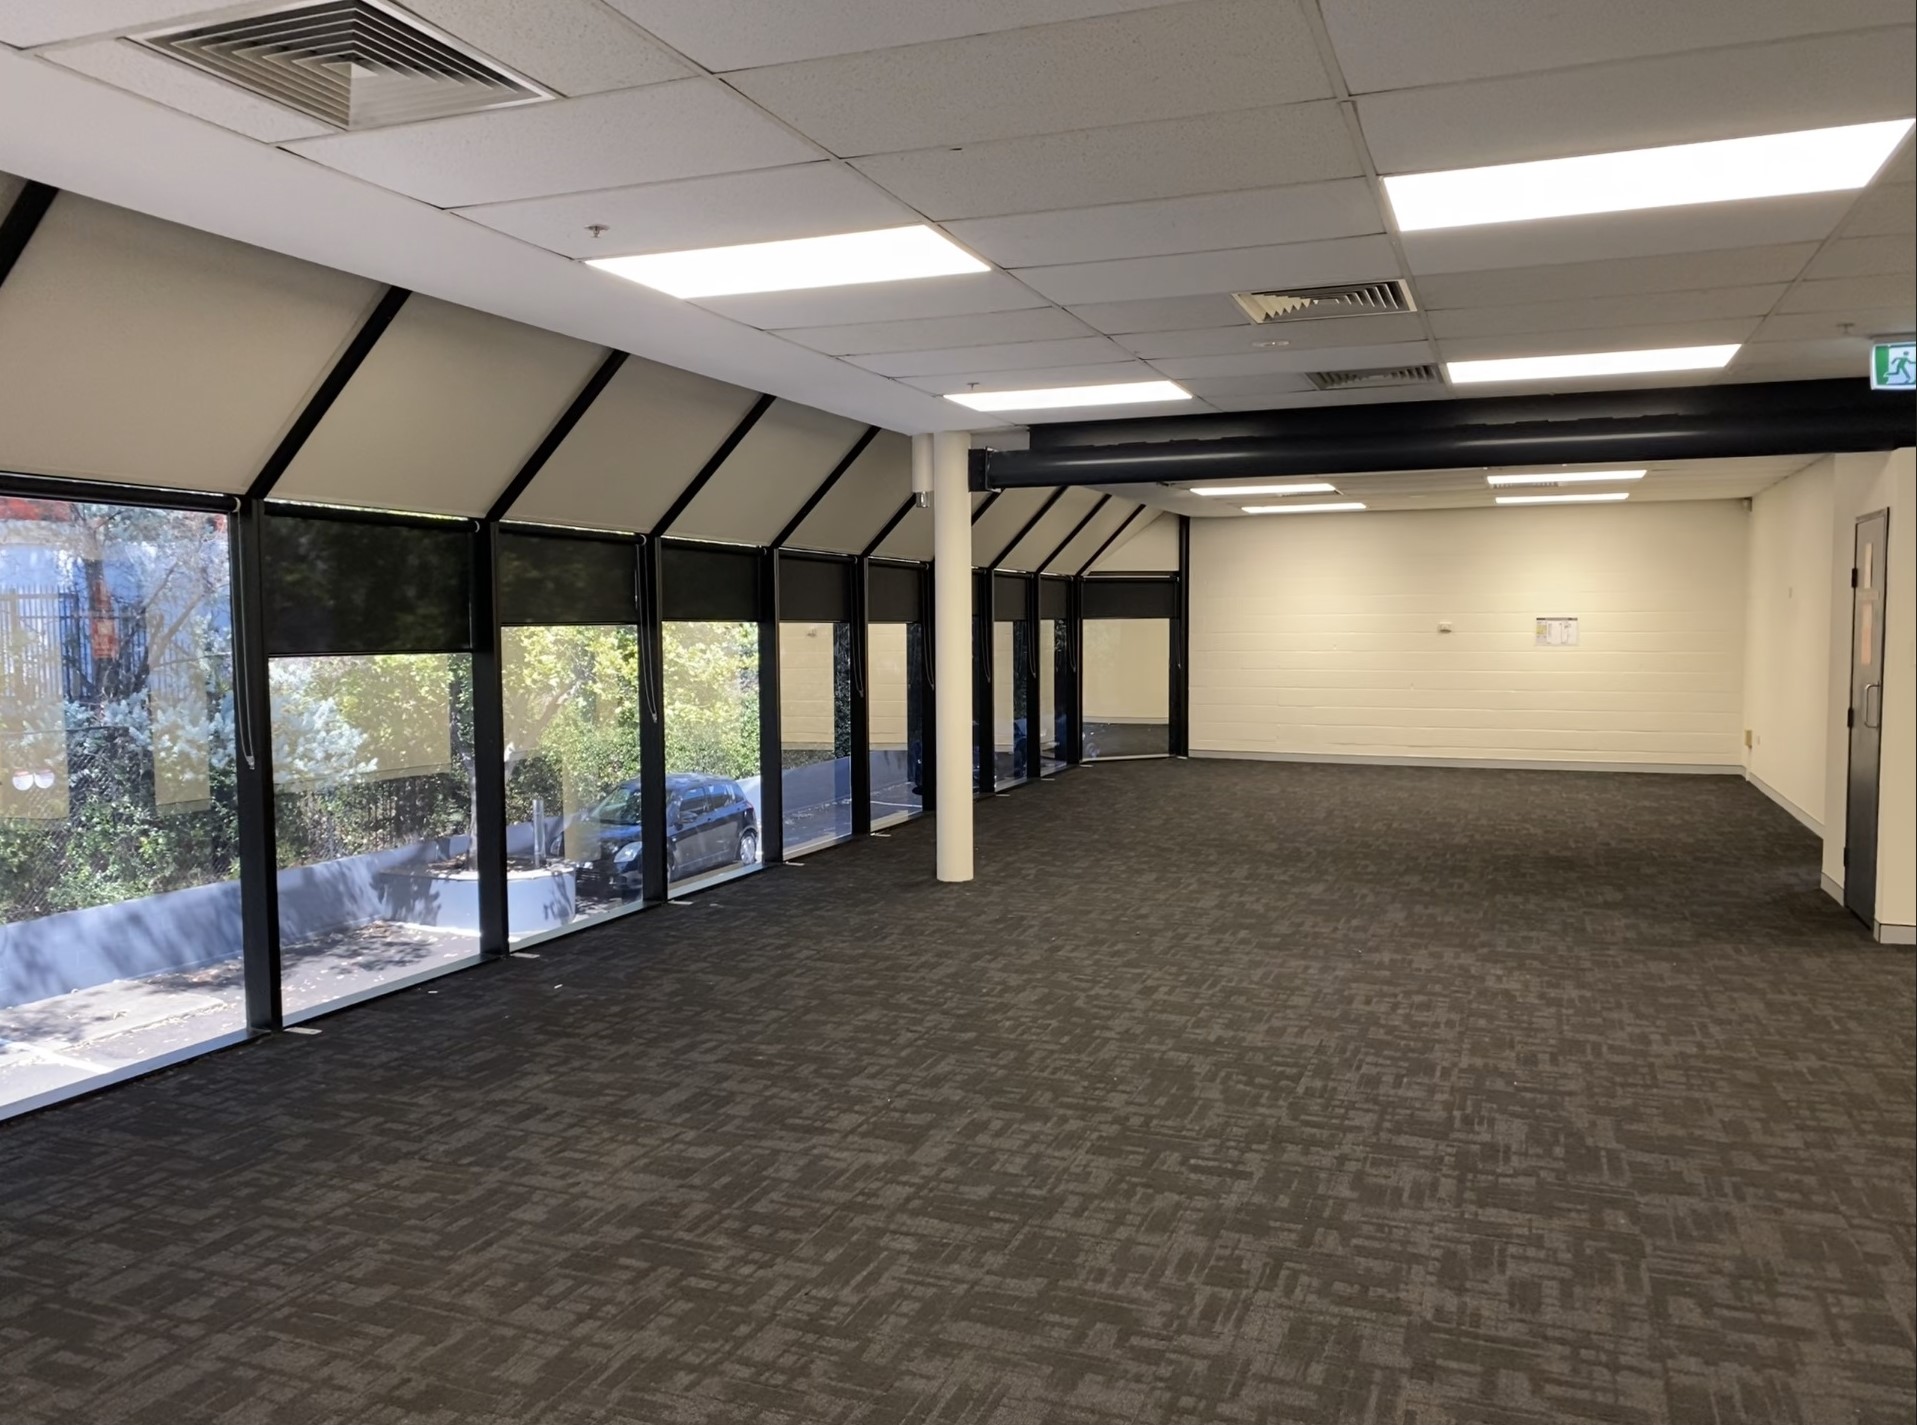 Commercial property for lease in silverwater 2